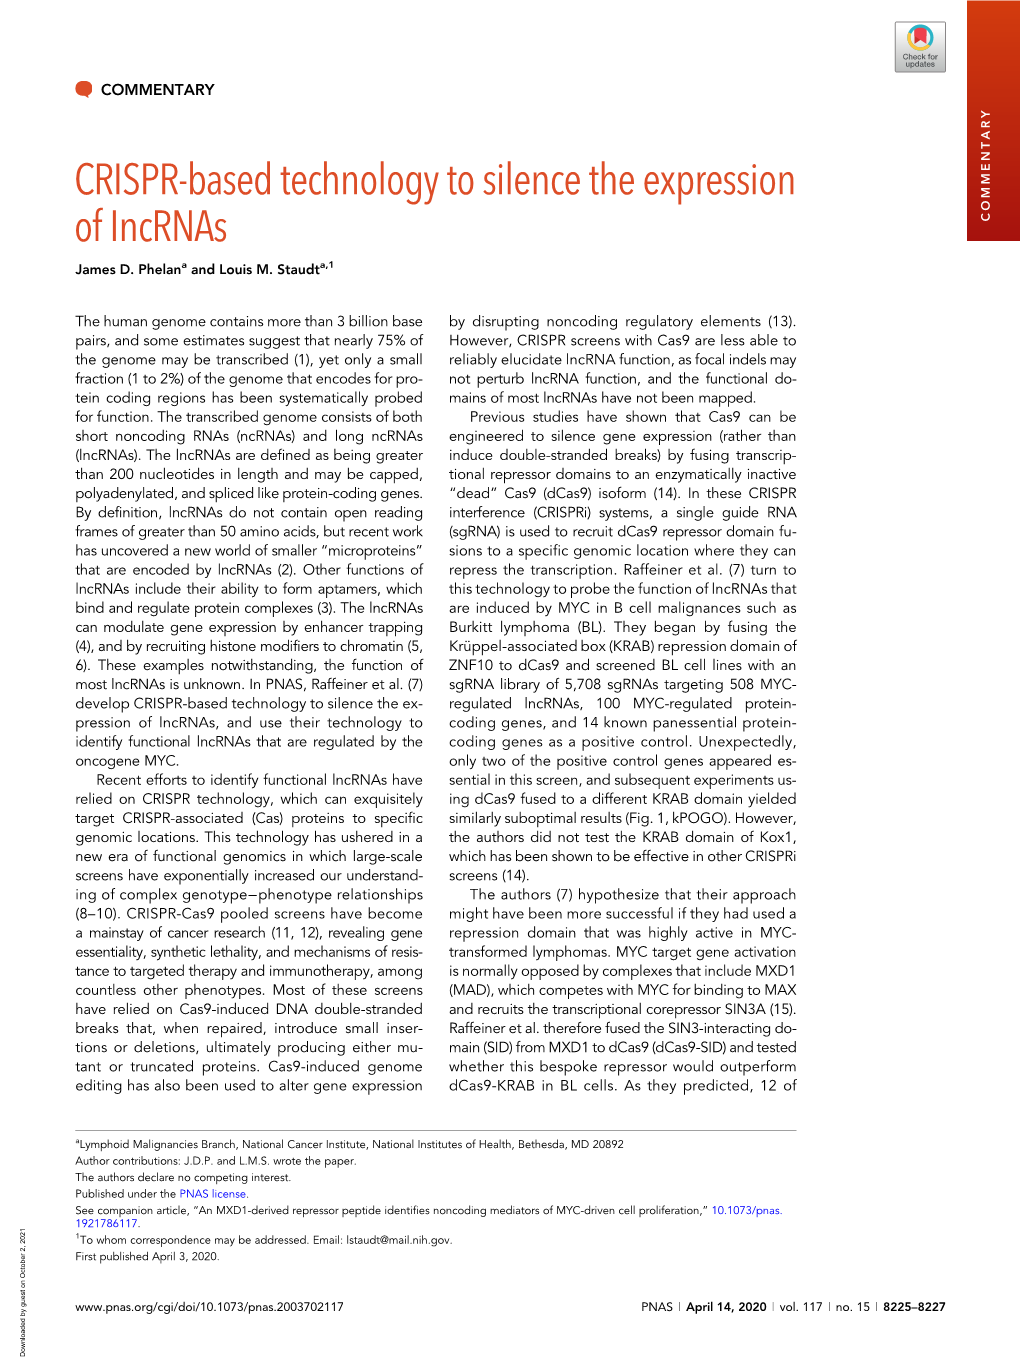 CRISPR-Based Technology to Silence the Expression of Incrnas COMMENTARY James D